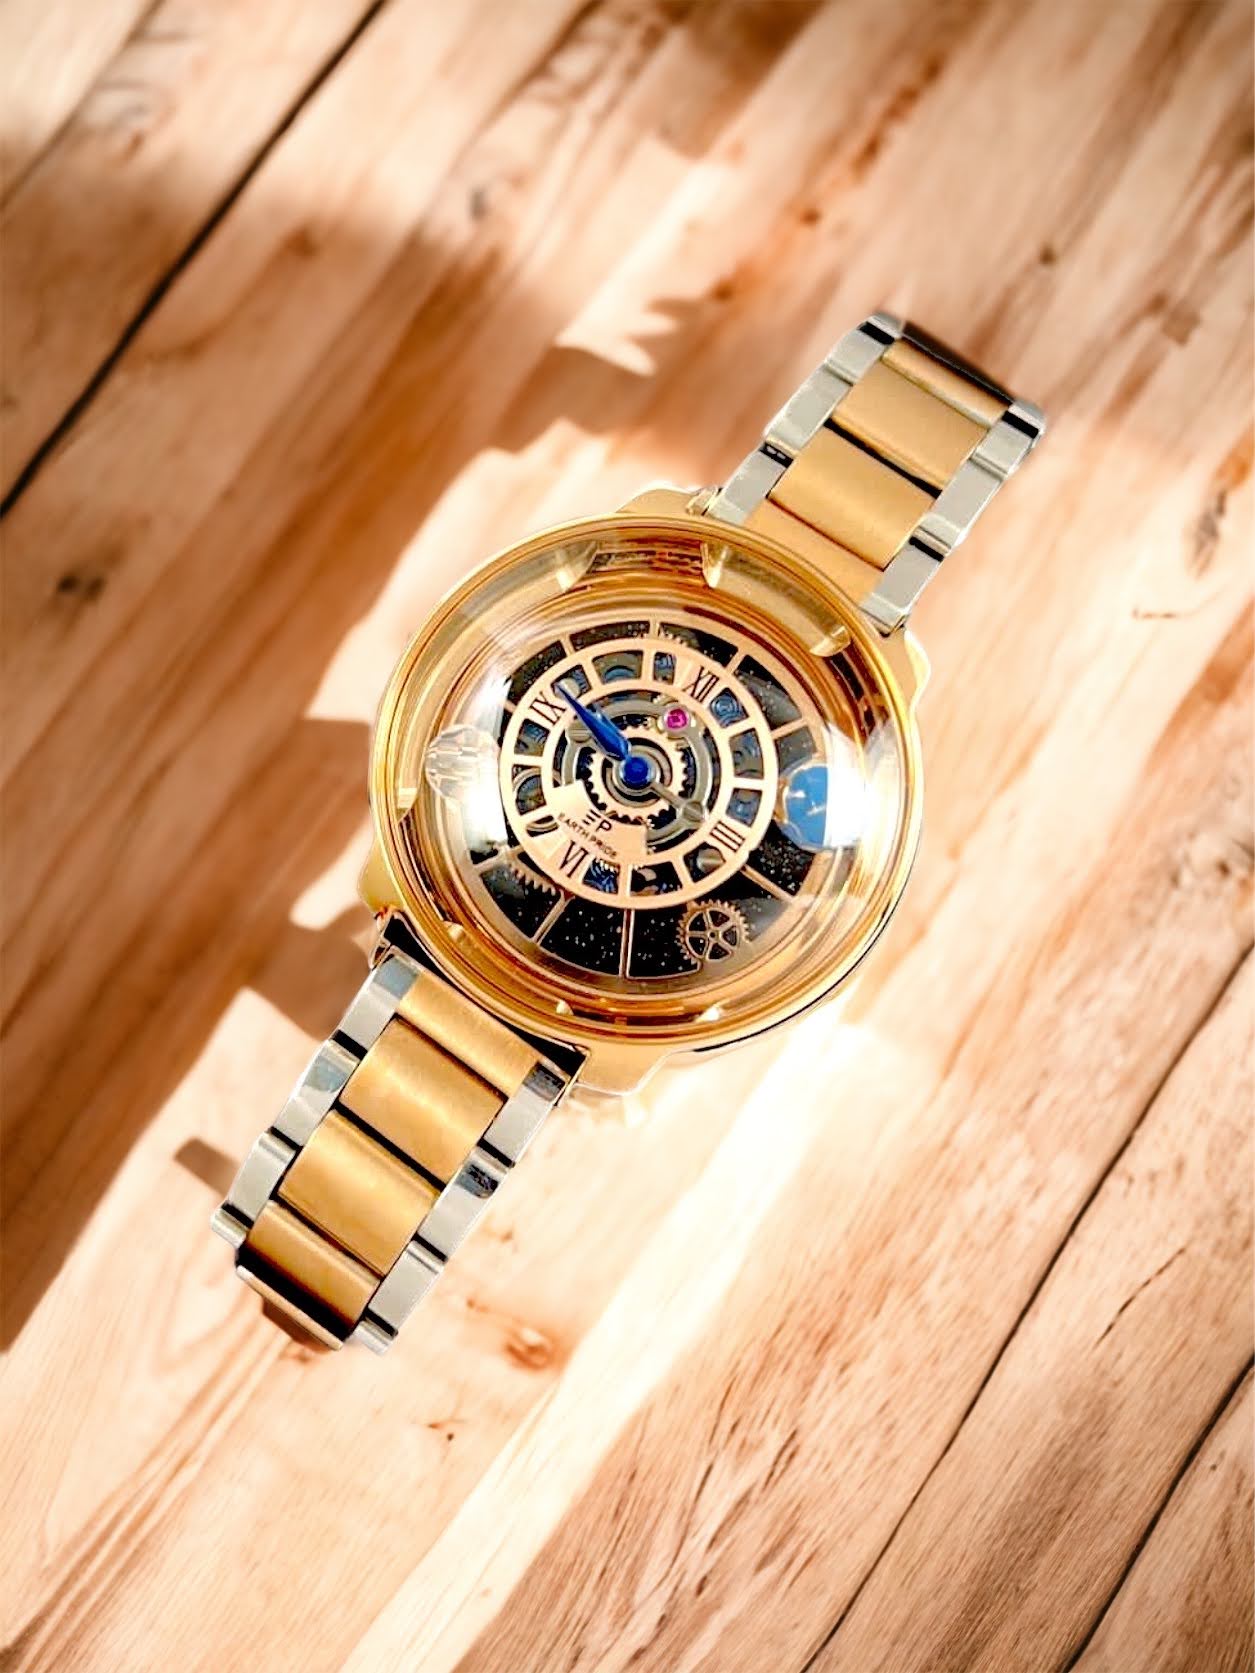 Discover the Rare and Exclusive Earth Pride Unisex Quartz women’s Watch - the Ultimate Symbol of Luxury